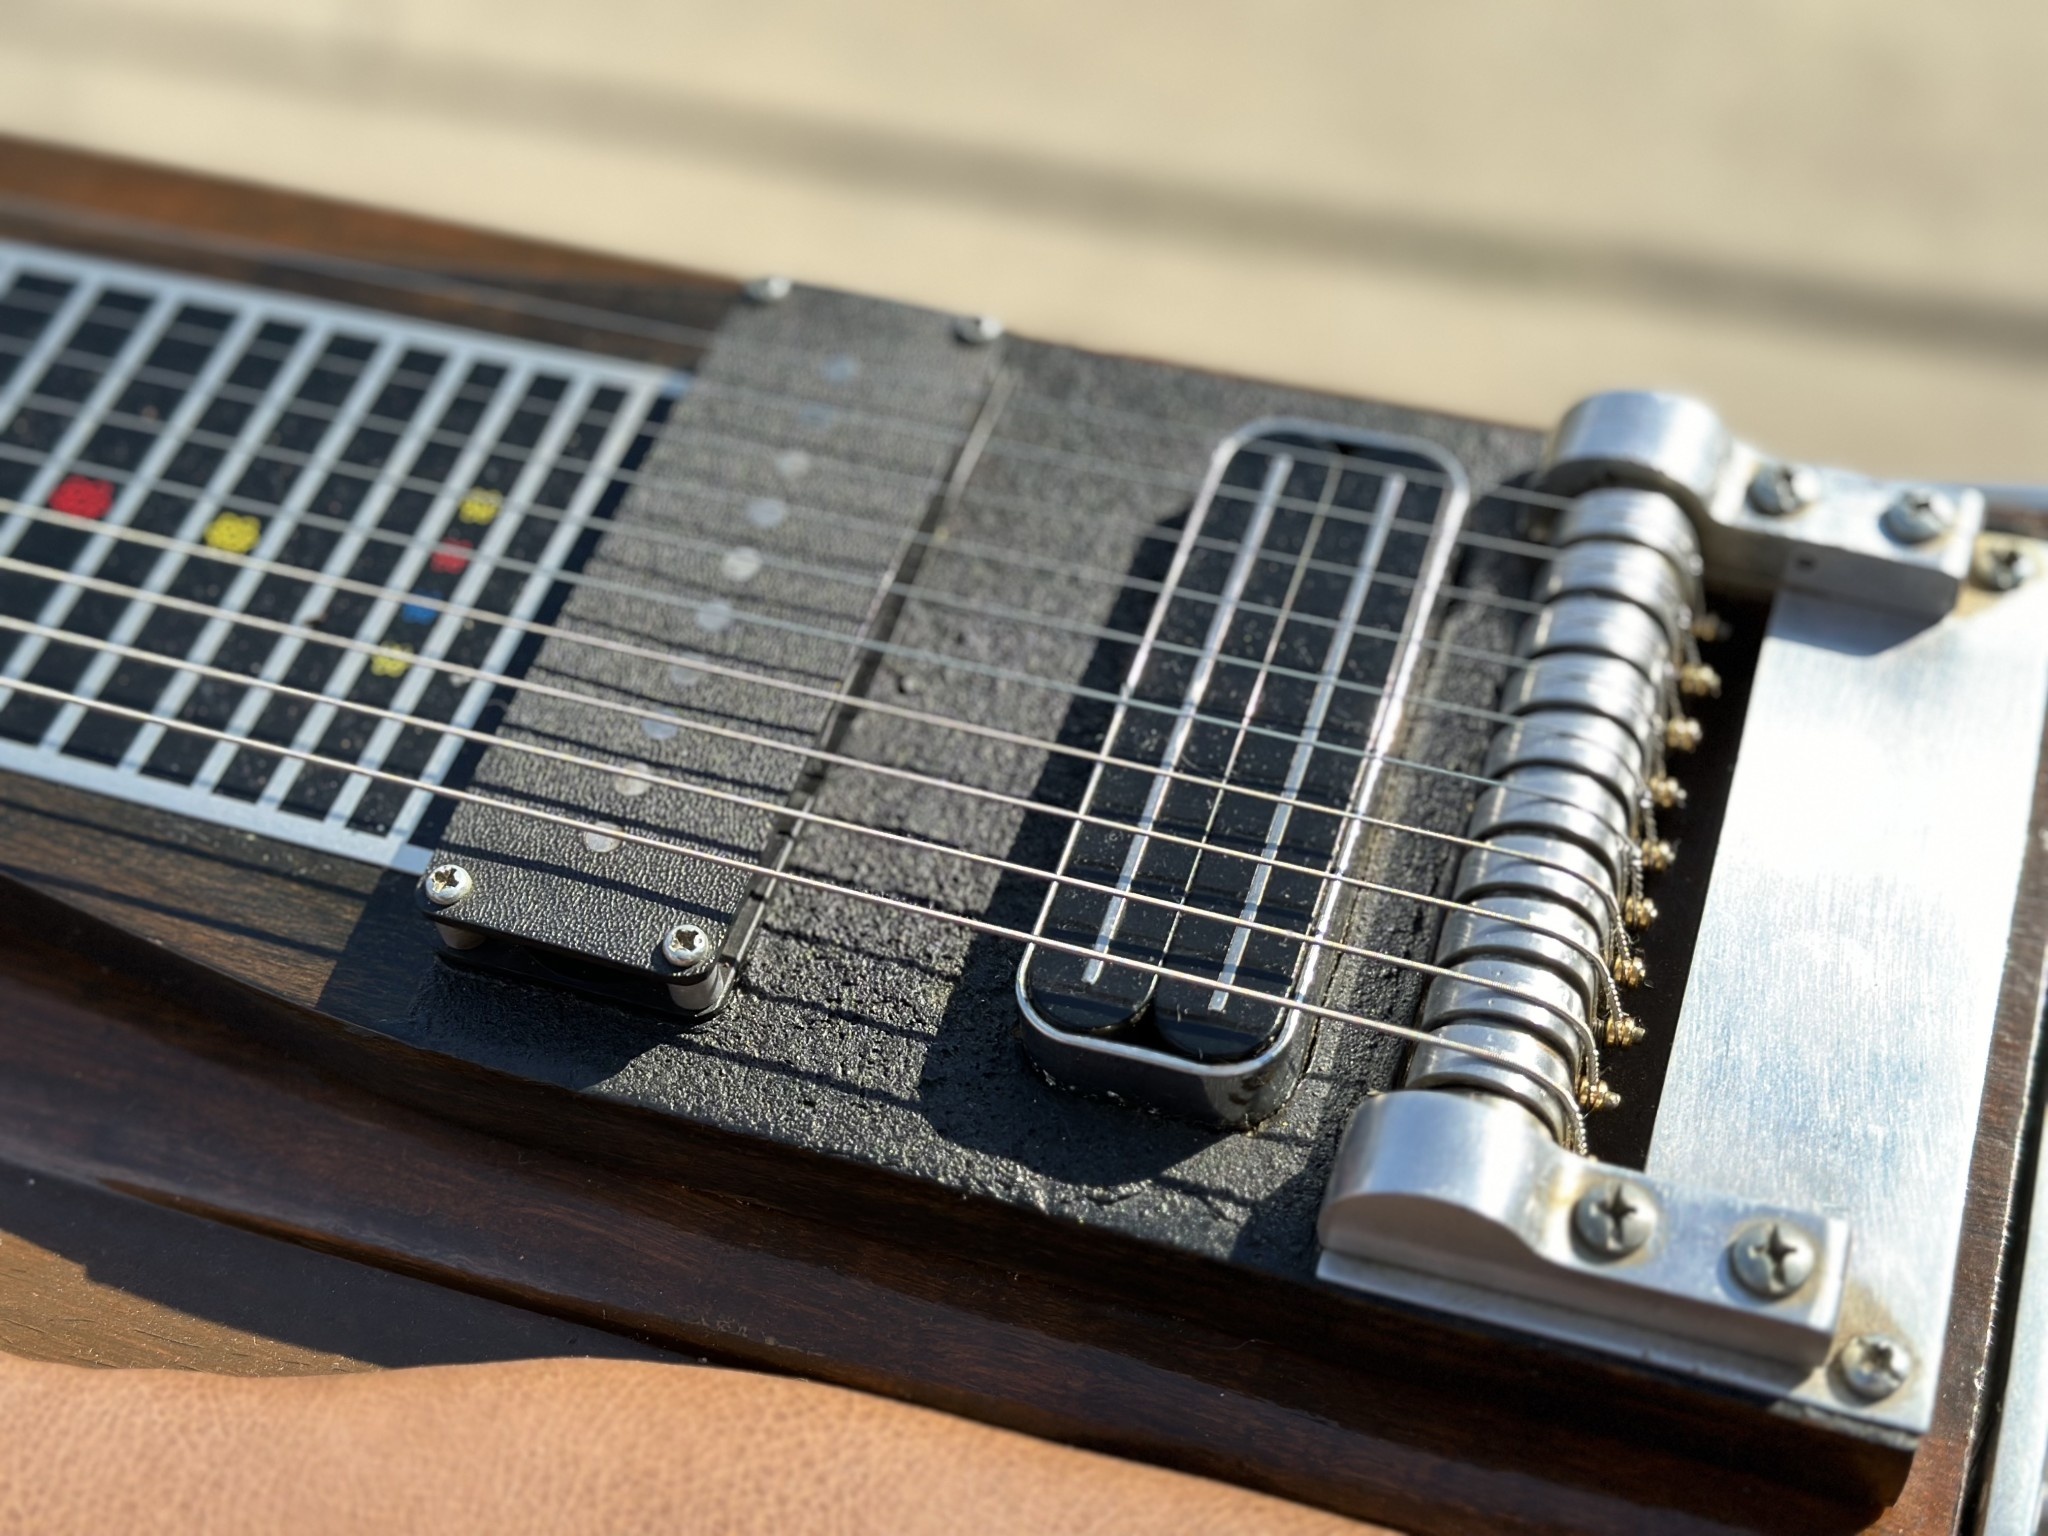 Connerley 10-string Pedal Steel, E9-10